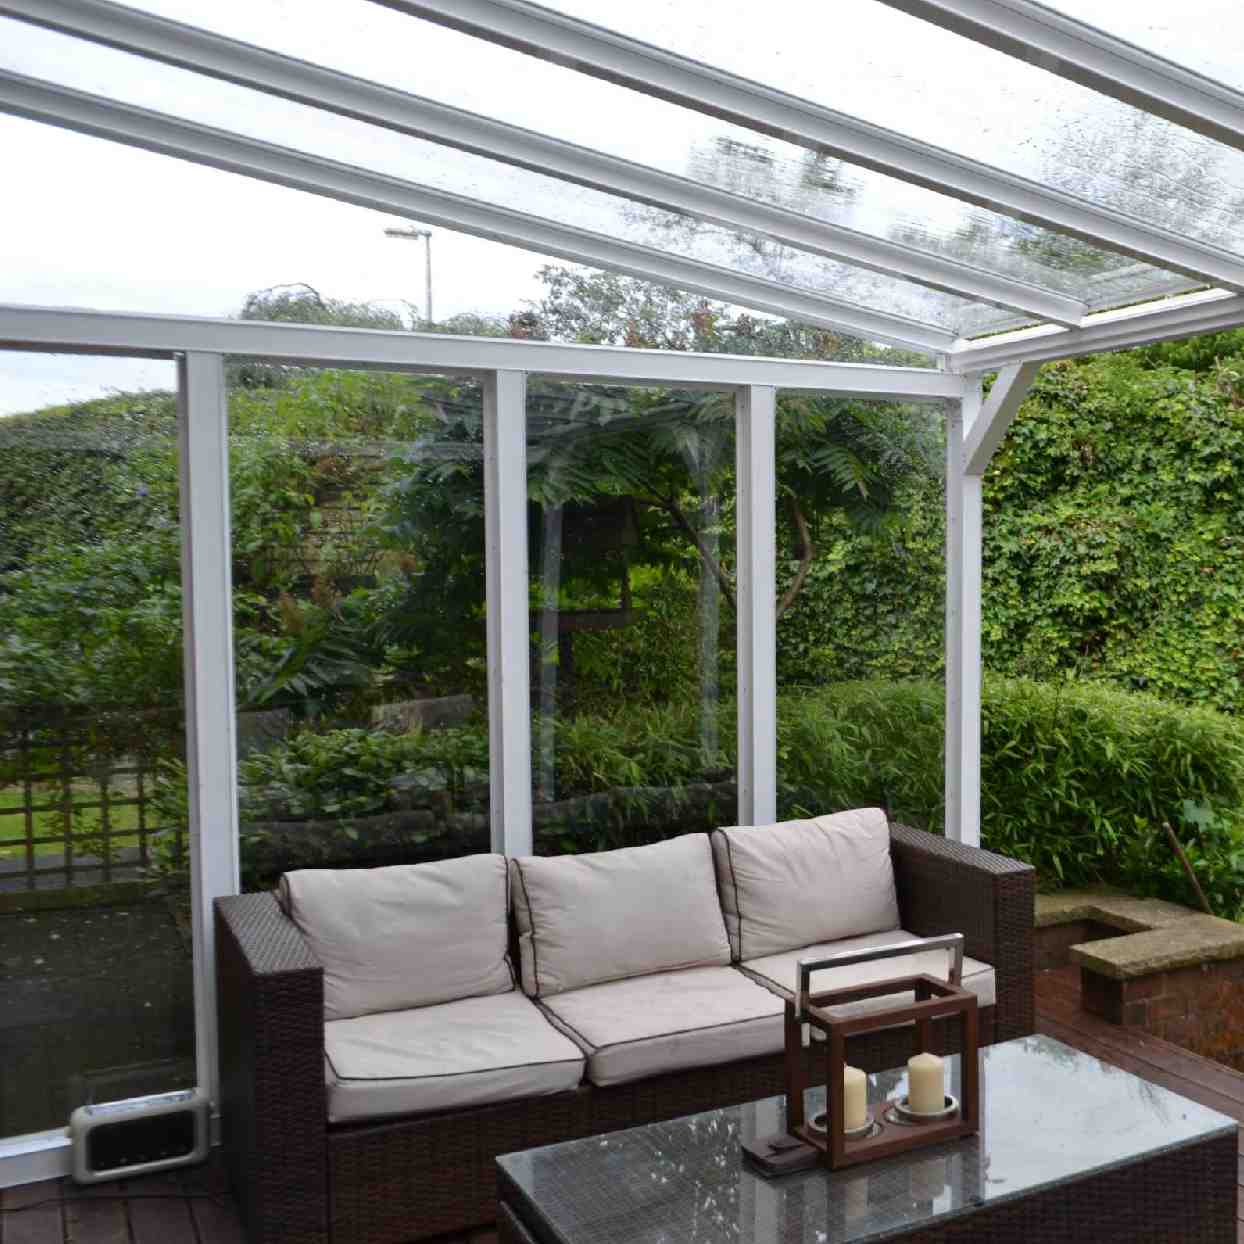 Buy Omega Verandah White with 16mm Polycarbonate Glazing - 5.6m (W) x 4.0m (P), (3) Supporting Posts online today